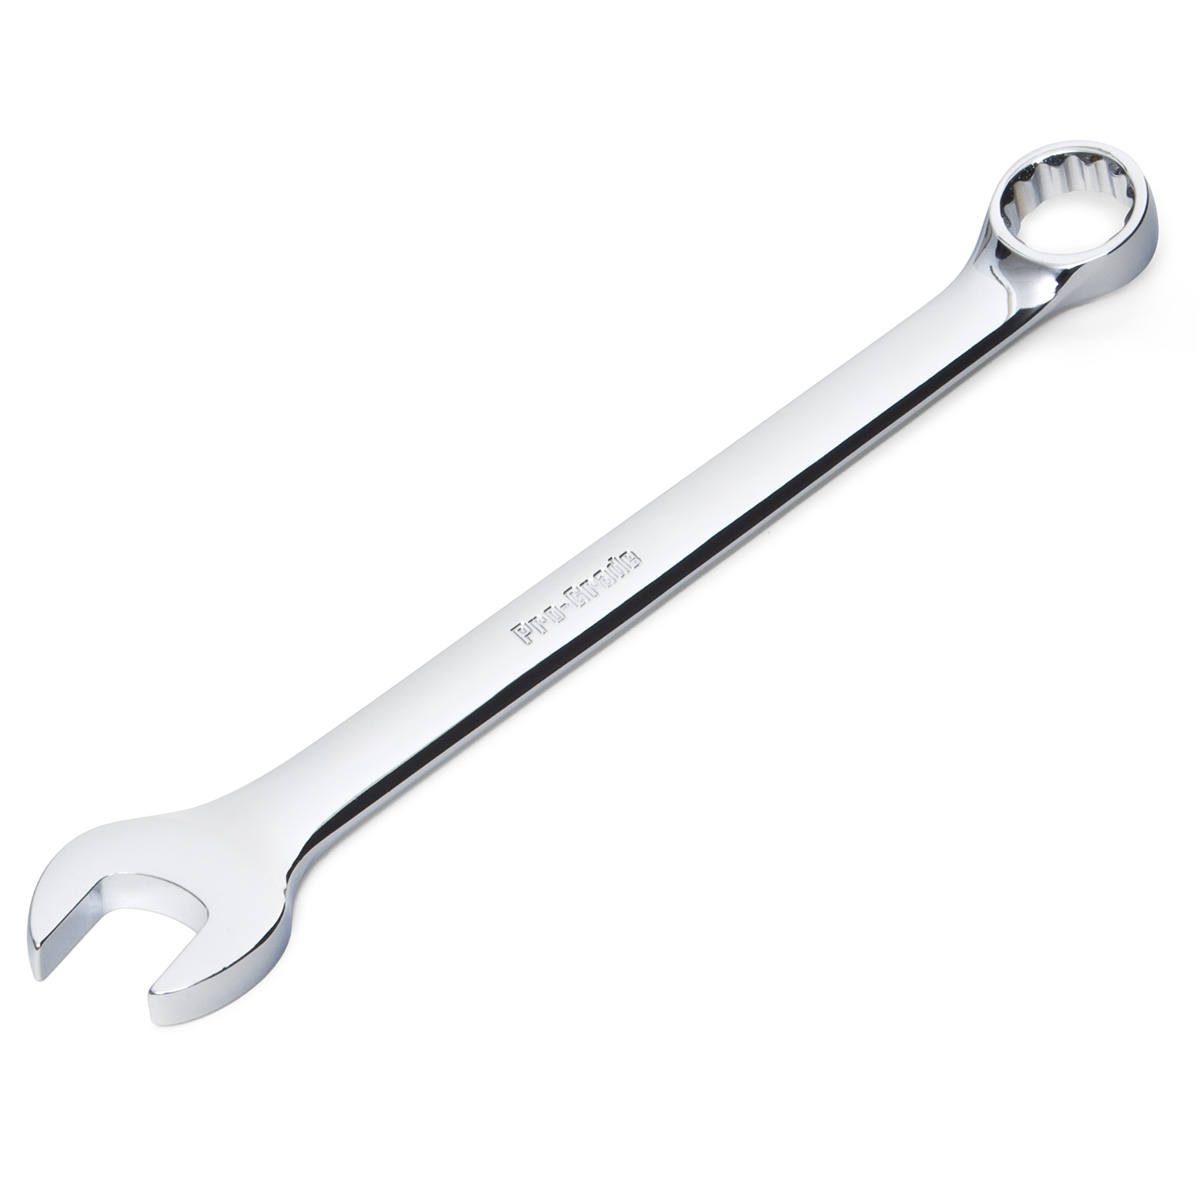 Details about   Dowidat 111 Chrome Van Combination Wrench 